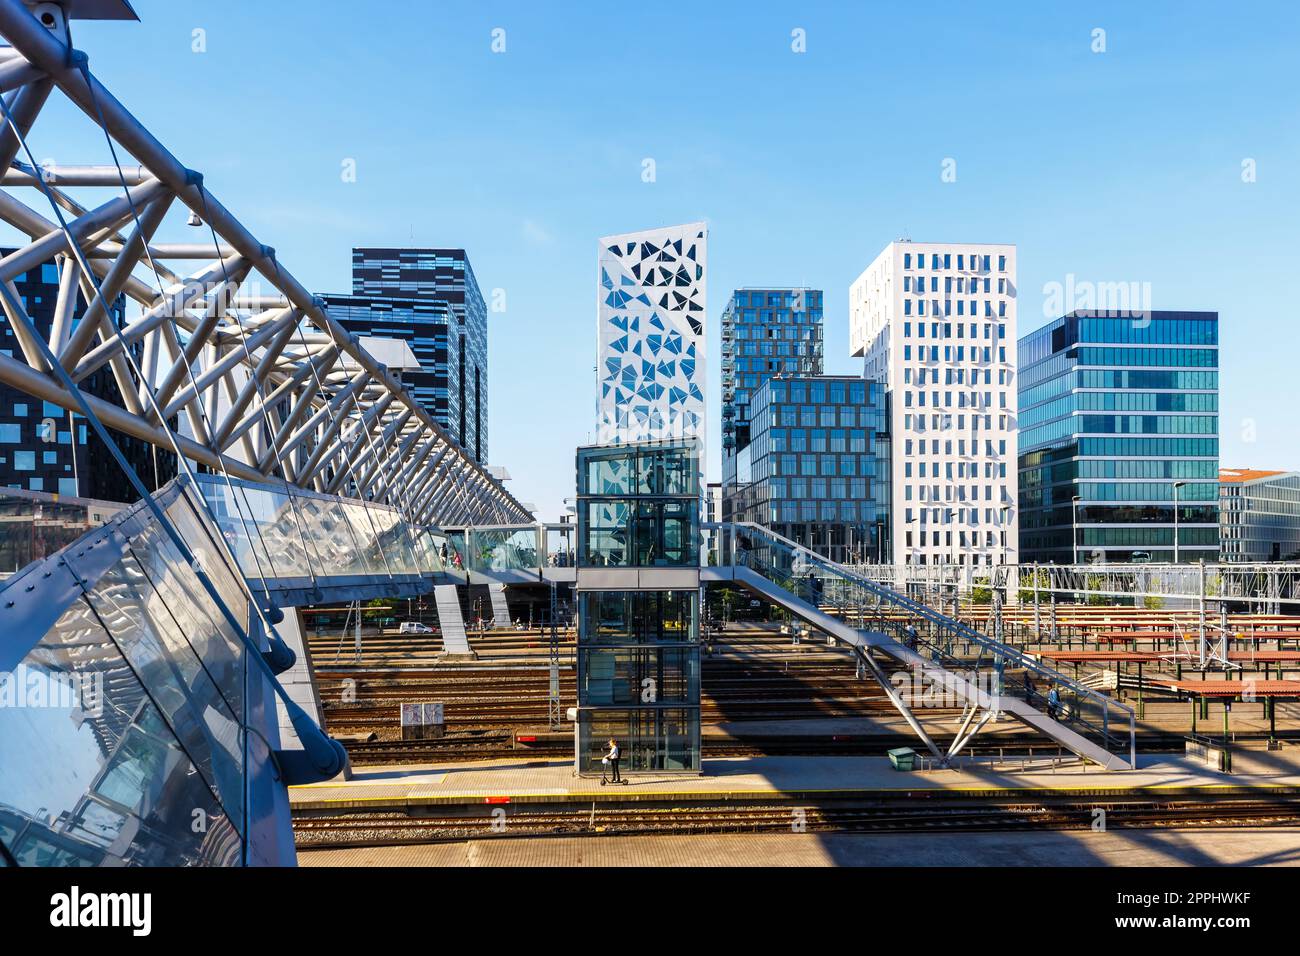 Oslo skyline modern city architecture buildings with a bridge at Barcode District in Norway Stock Photo